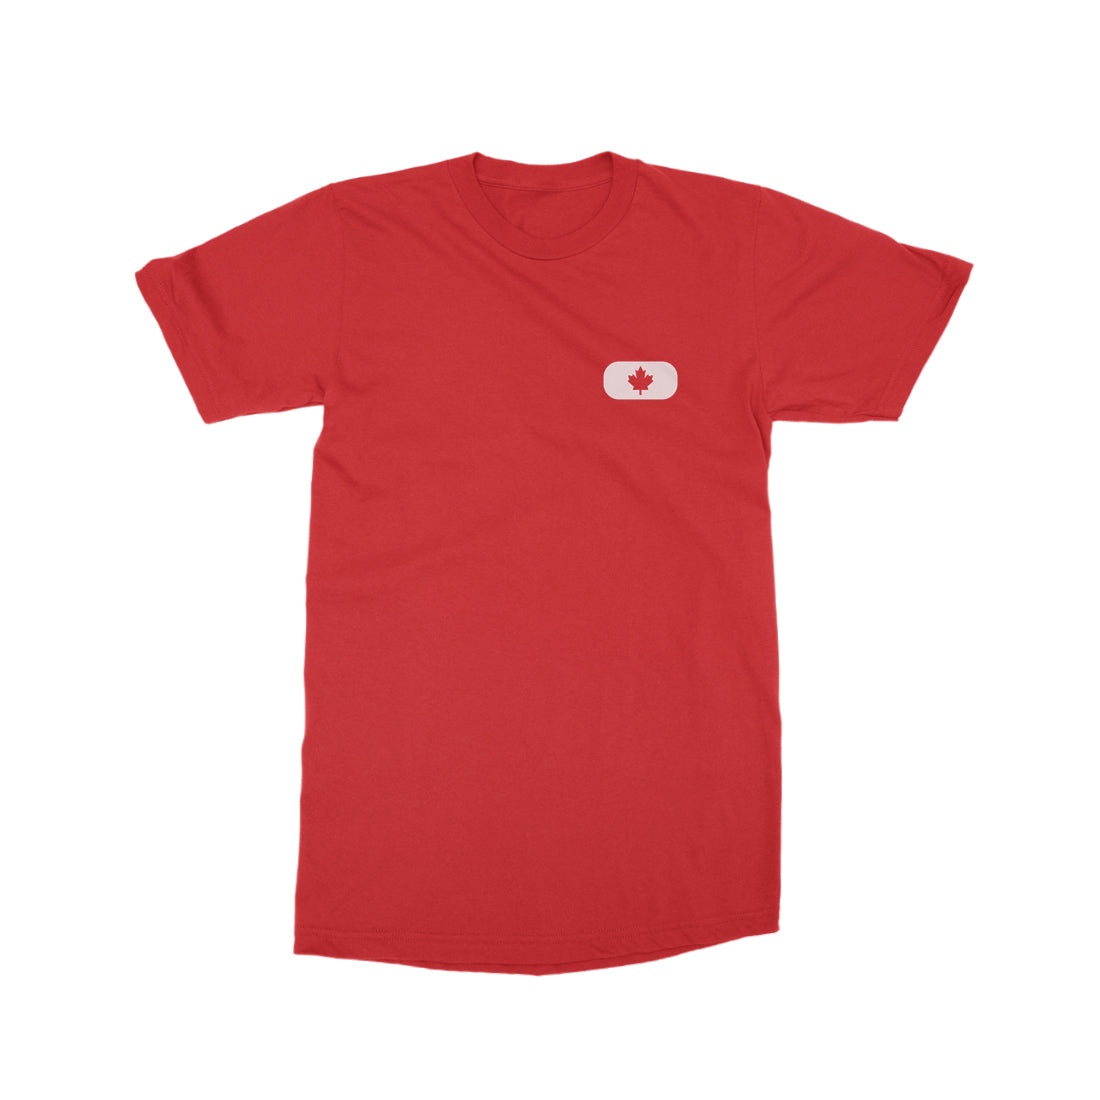 Thank You Canada Tour - Skater YOUTH Tee - Red